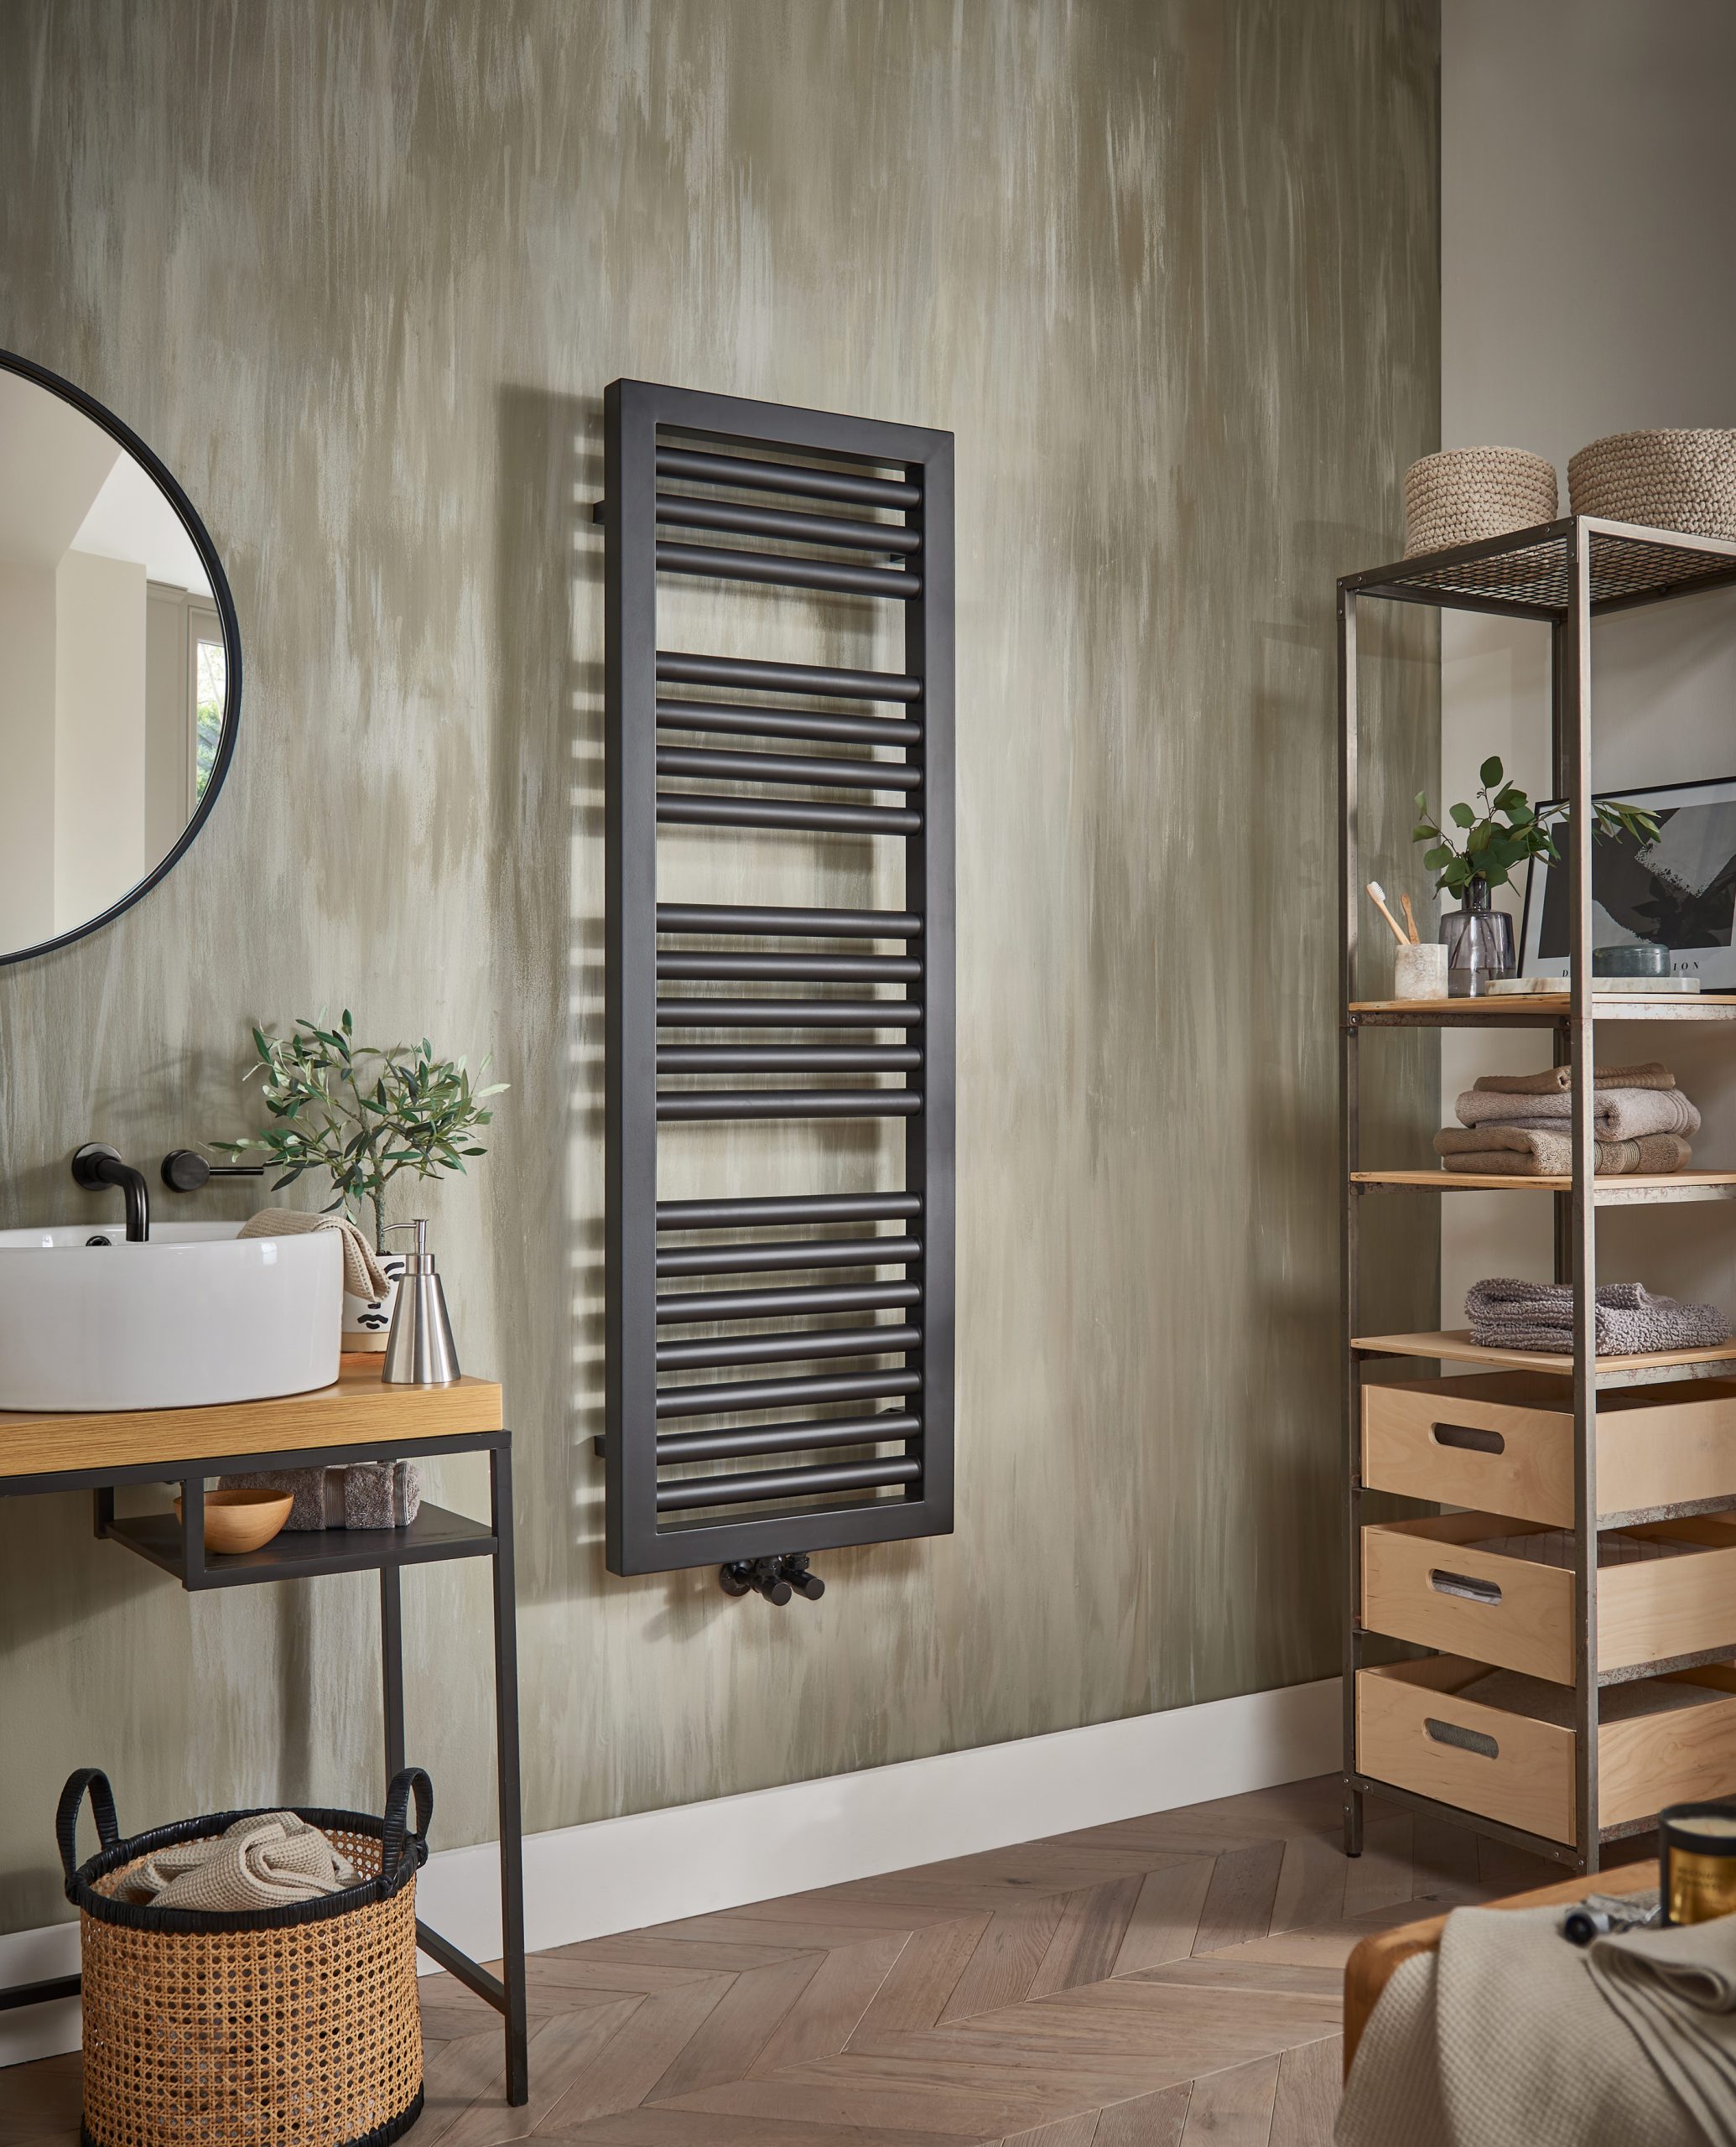 ‘Be Distinct’ with new Contrast Towel Warmer by Vogue (UK) @vogueukltd